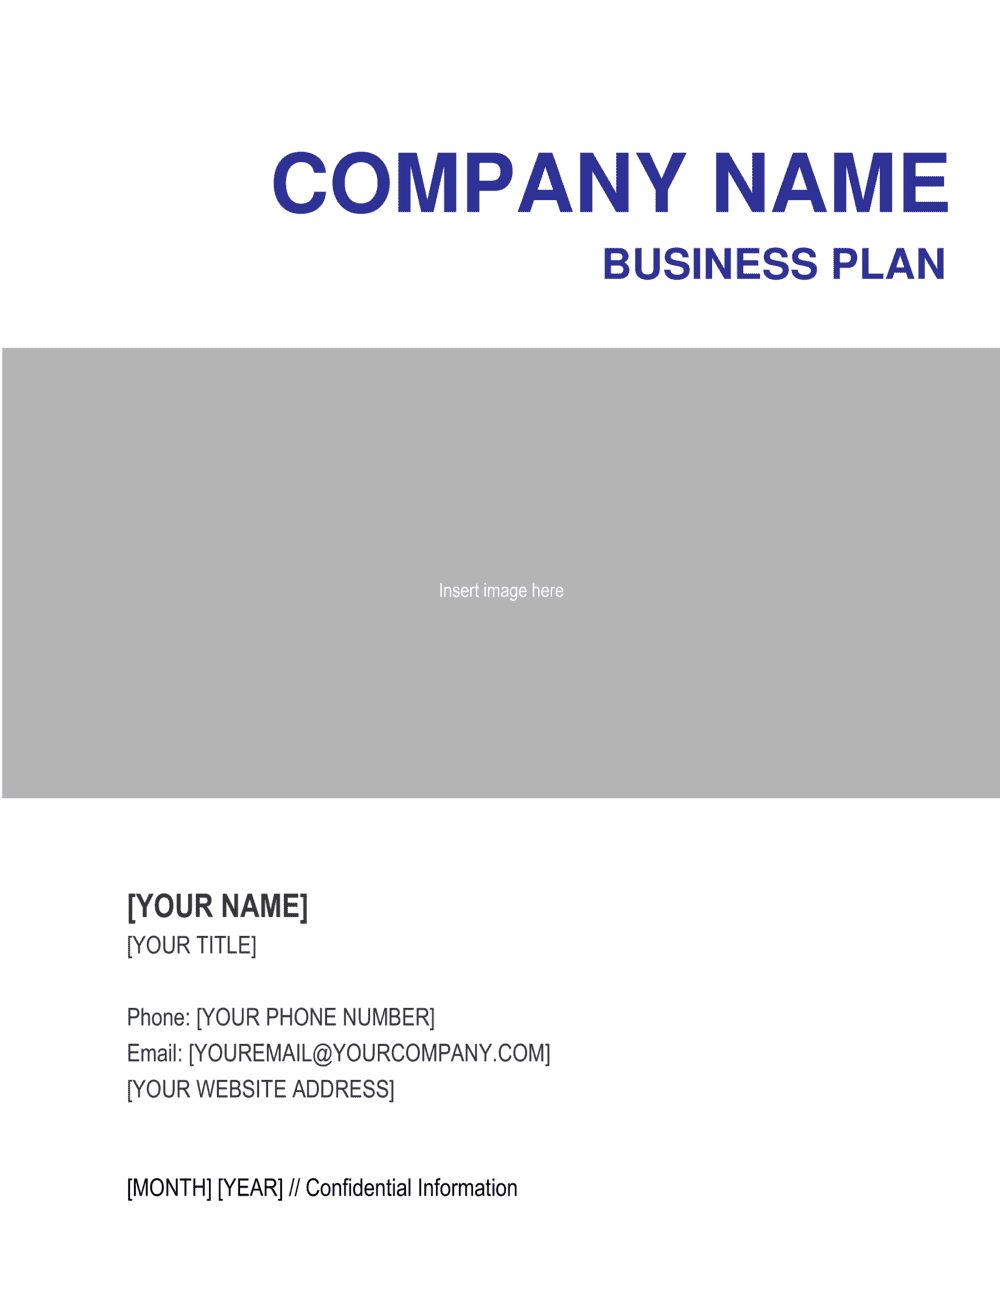 Template Of A Business Plan from templates.business-in-a-box.com